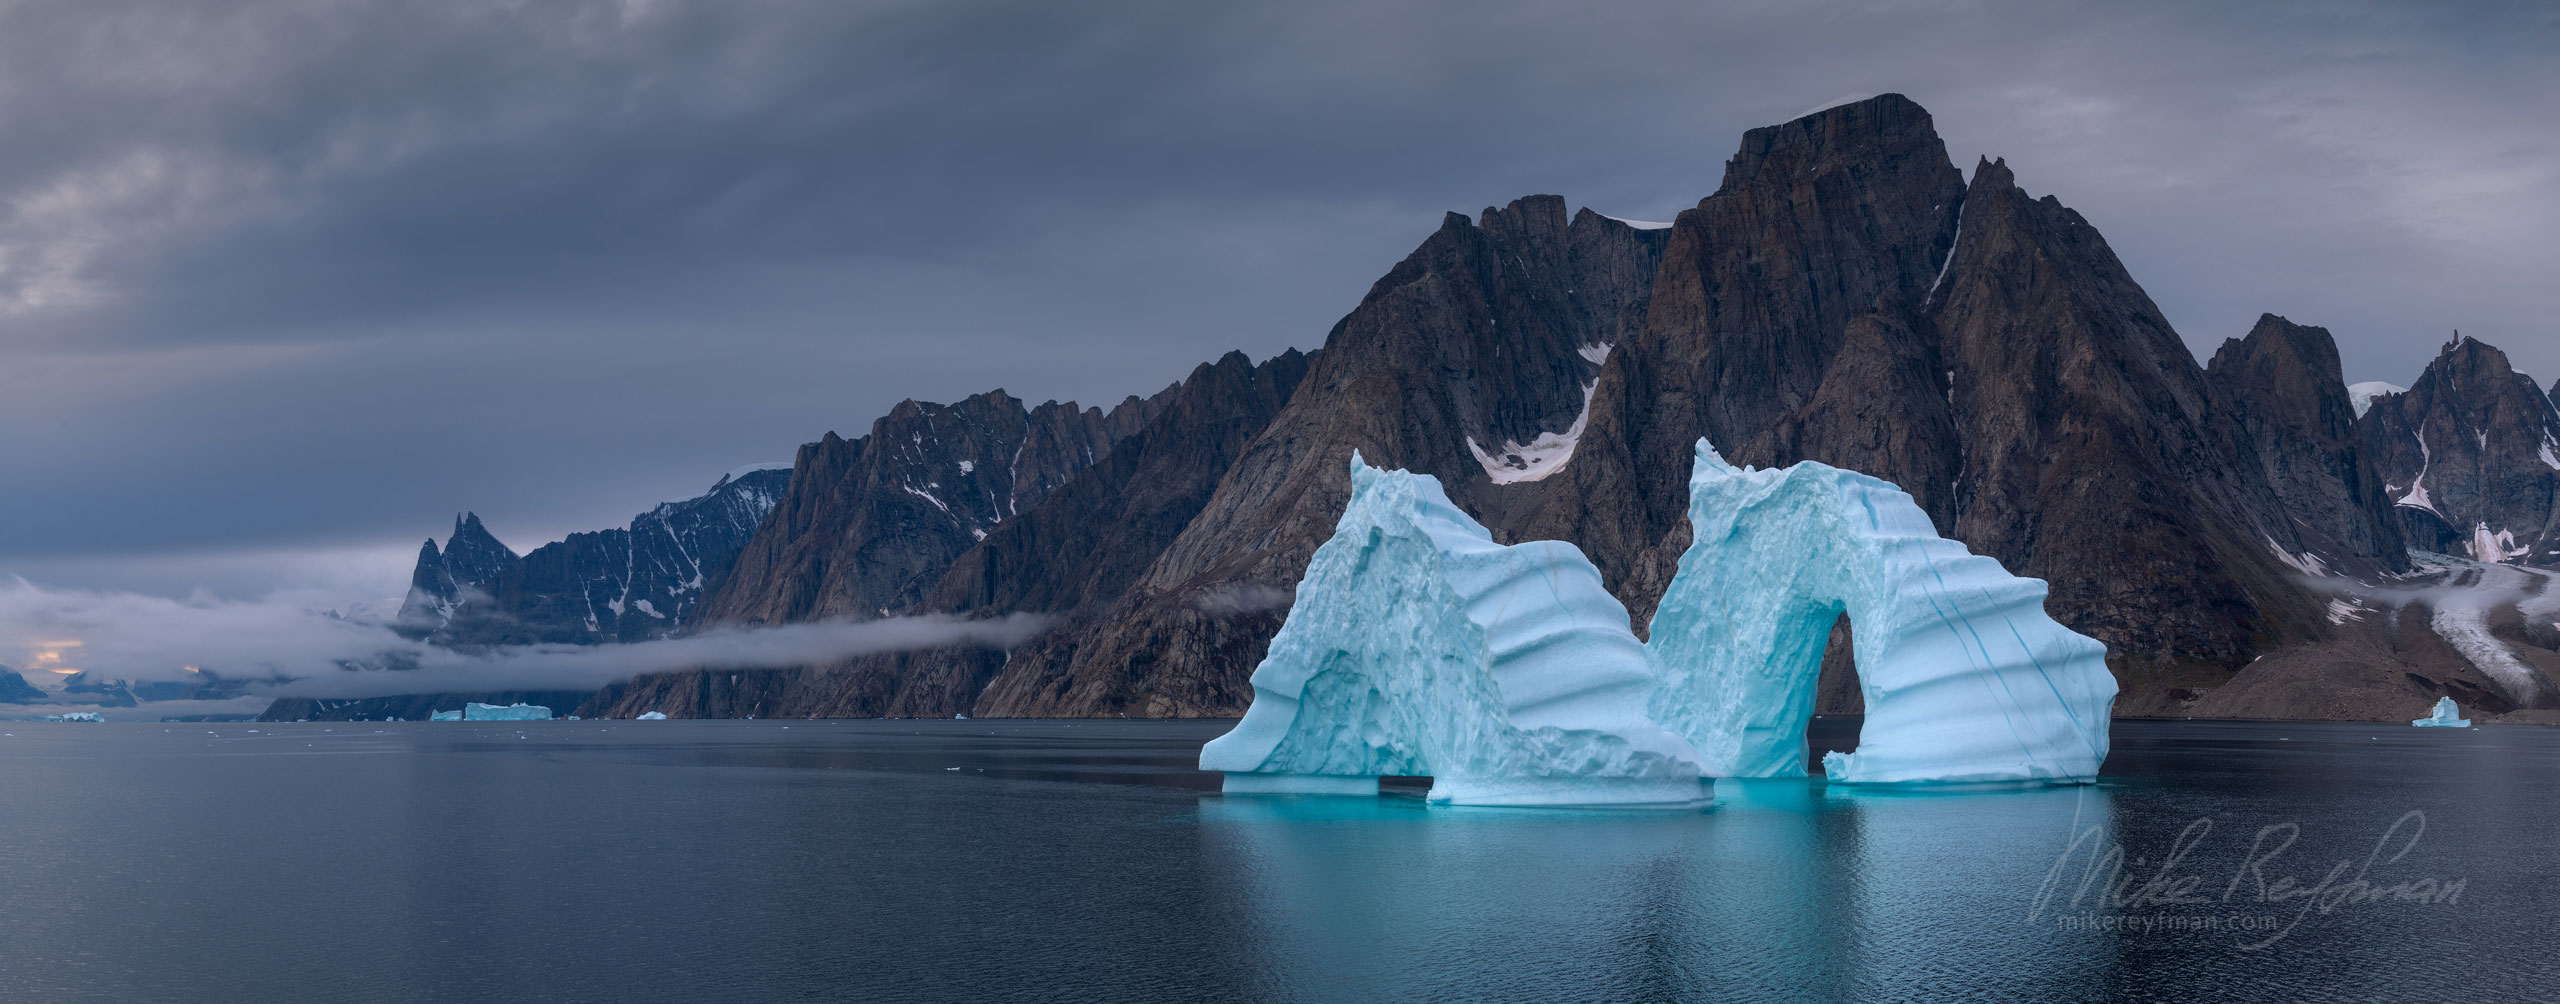 Icebergs in Scoresby Sund. Greenland. 073-GR-SC_50B7658_Pano-1x2.55 - The Scoresby Sund fjord system and the settlement of Ittoqqortoormiit. East Greenland. - Mike Reyfman Photography